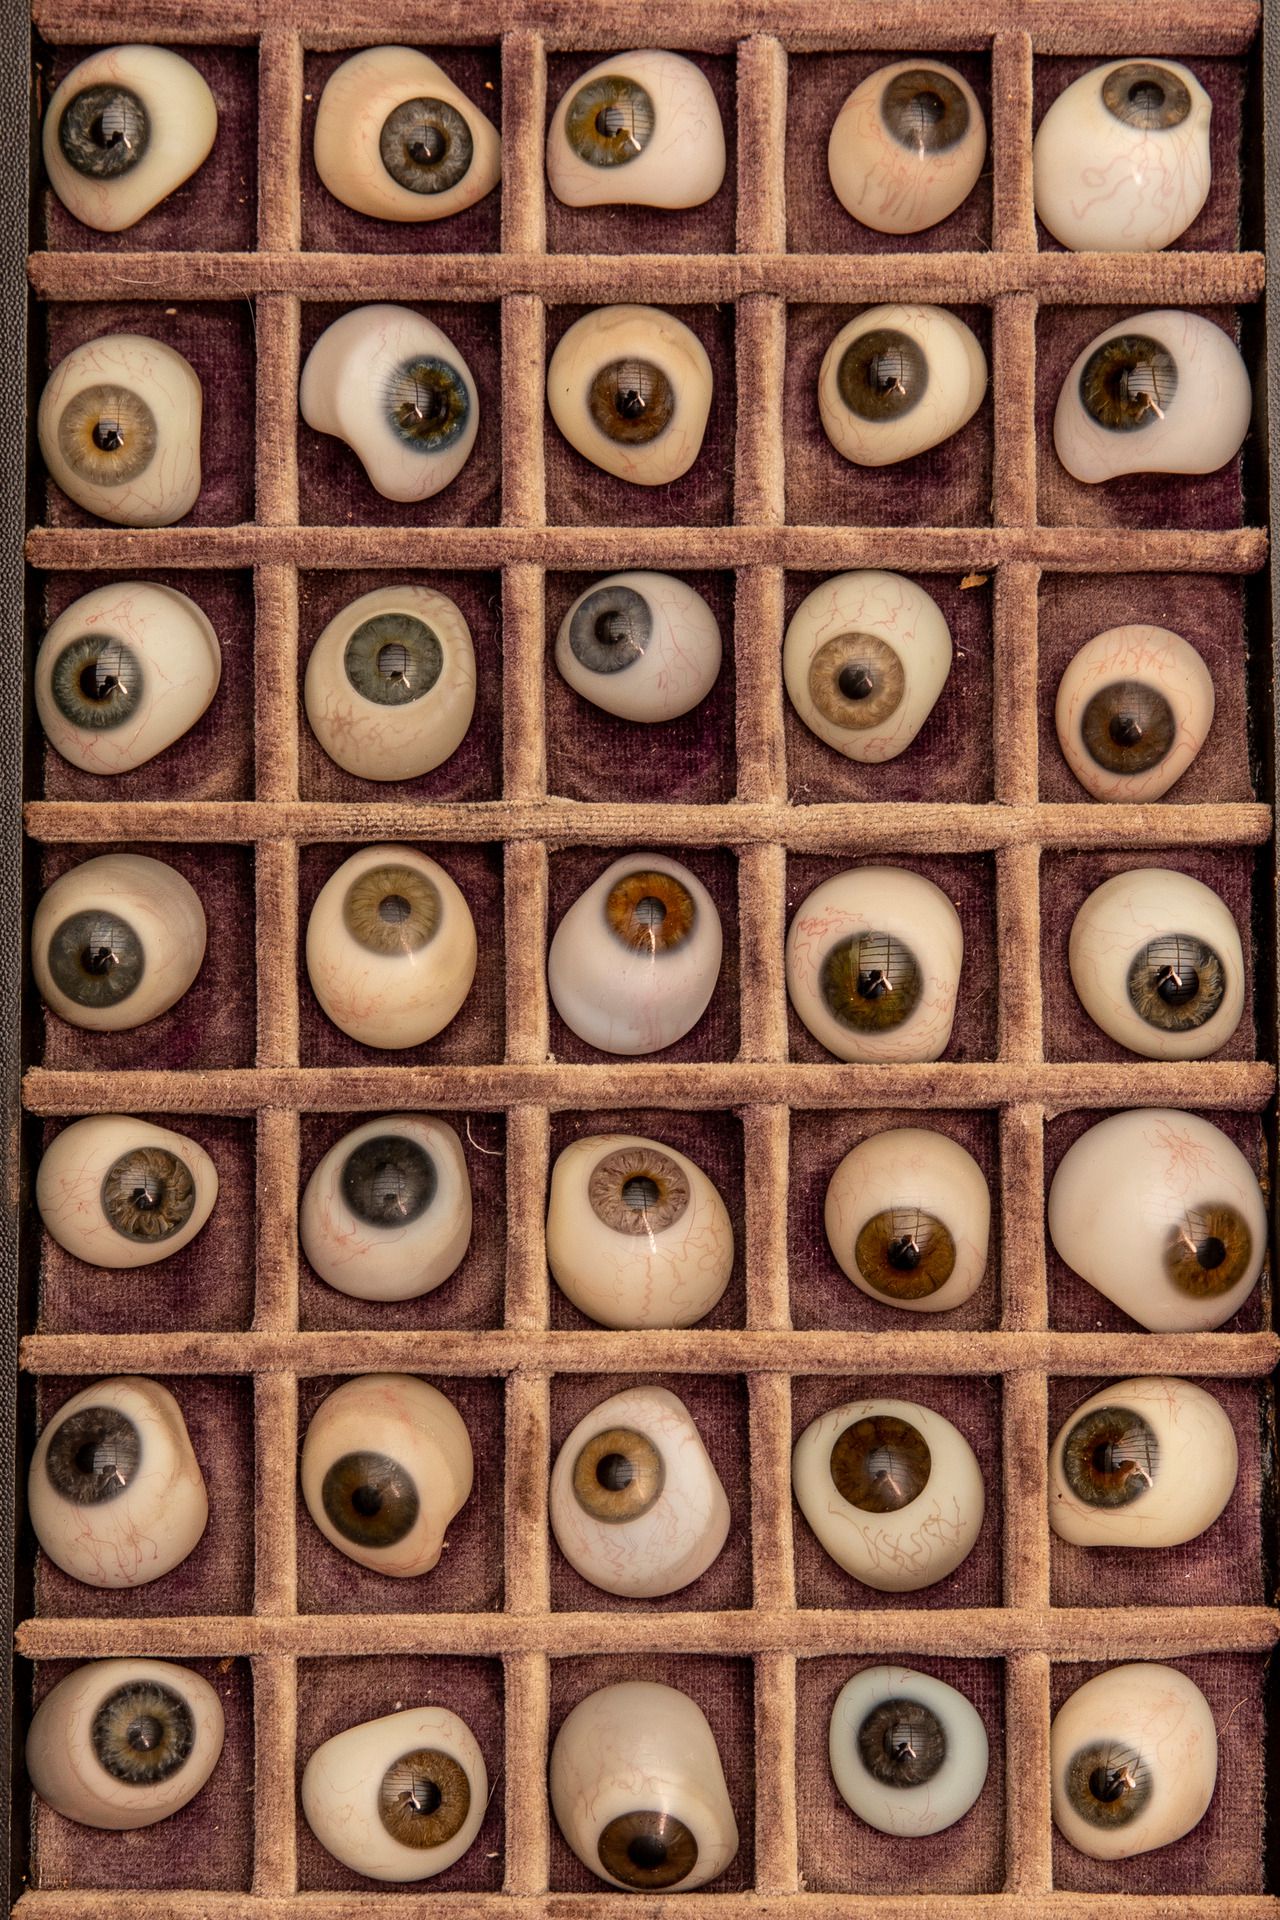 A collection of 200 artificial glass eyes (ocular prostheses)